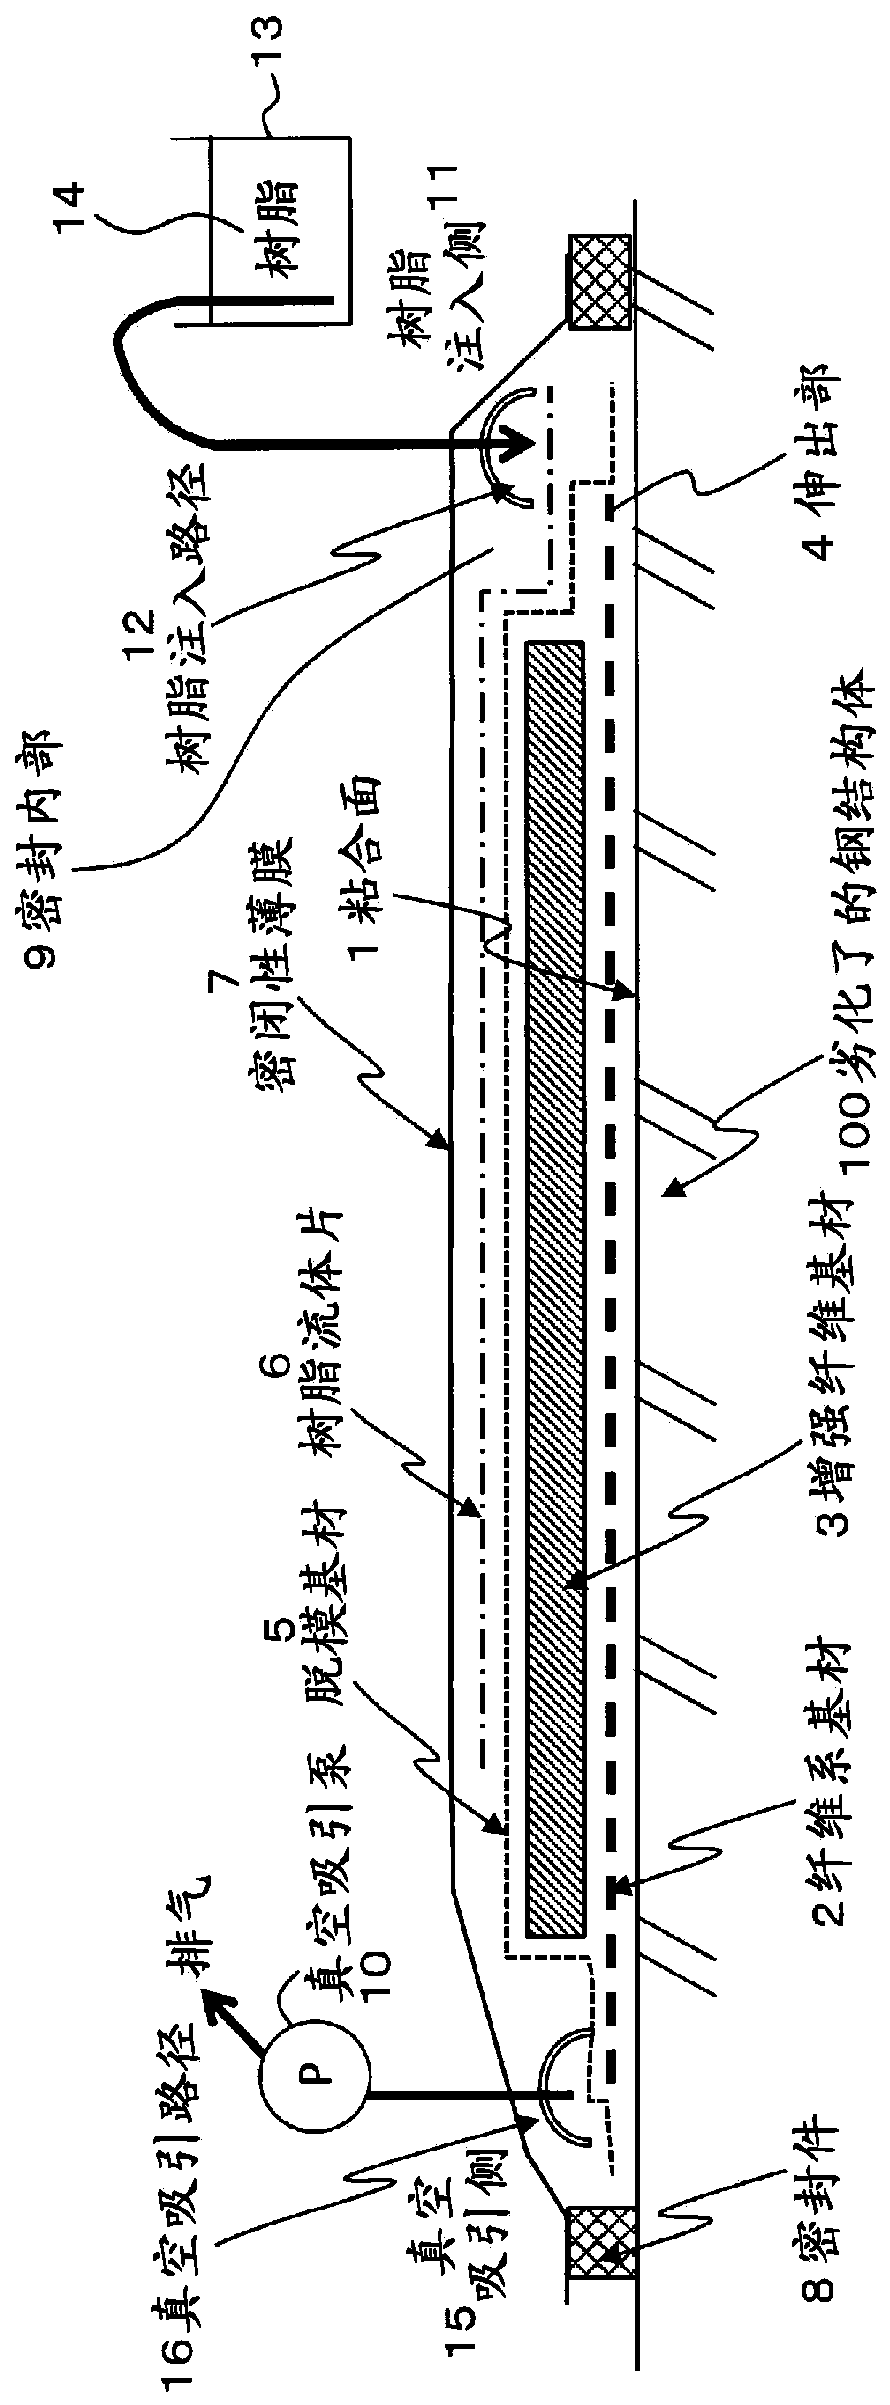 Structure-frp material bond construction and bonding method